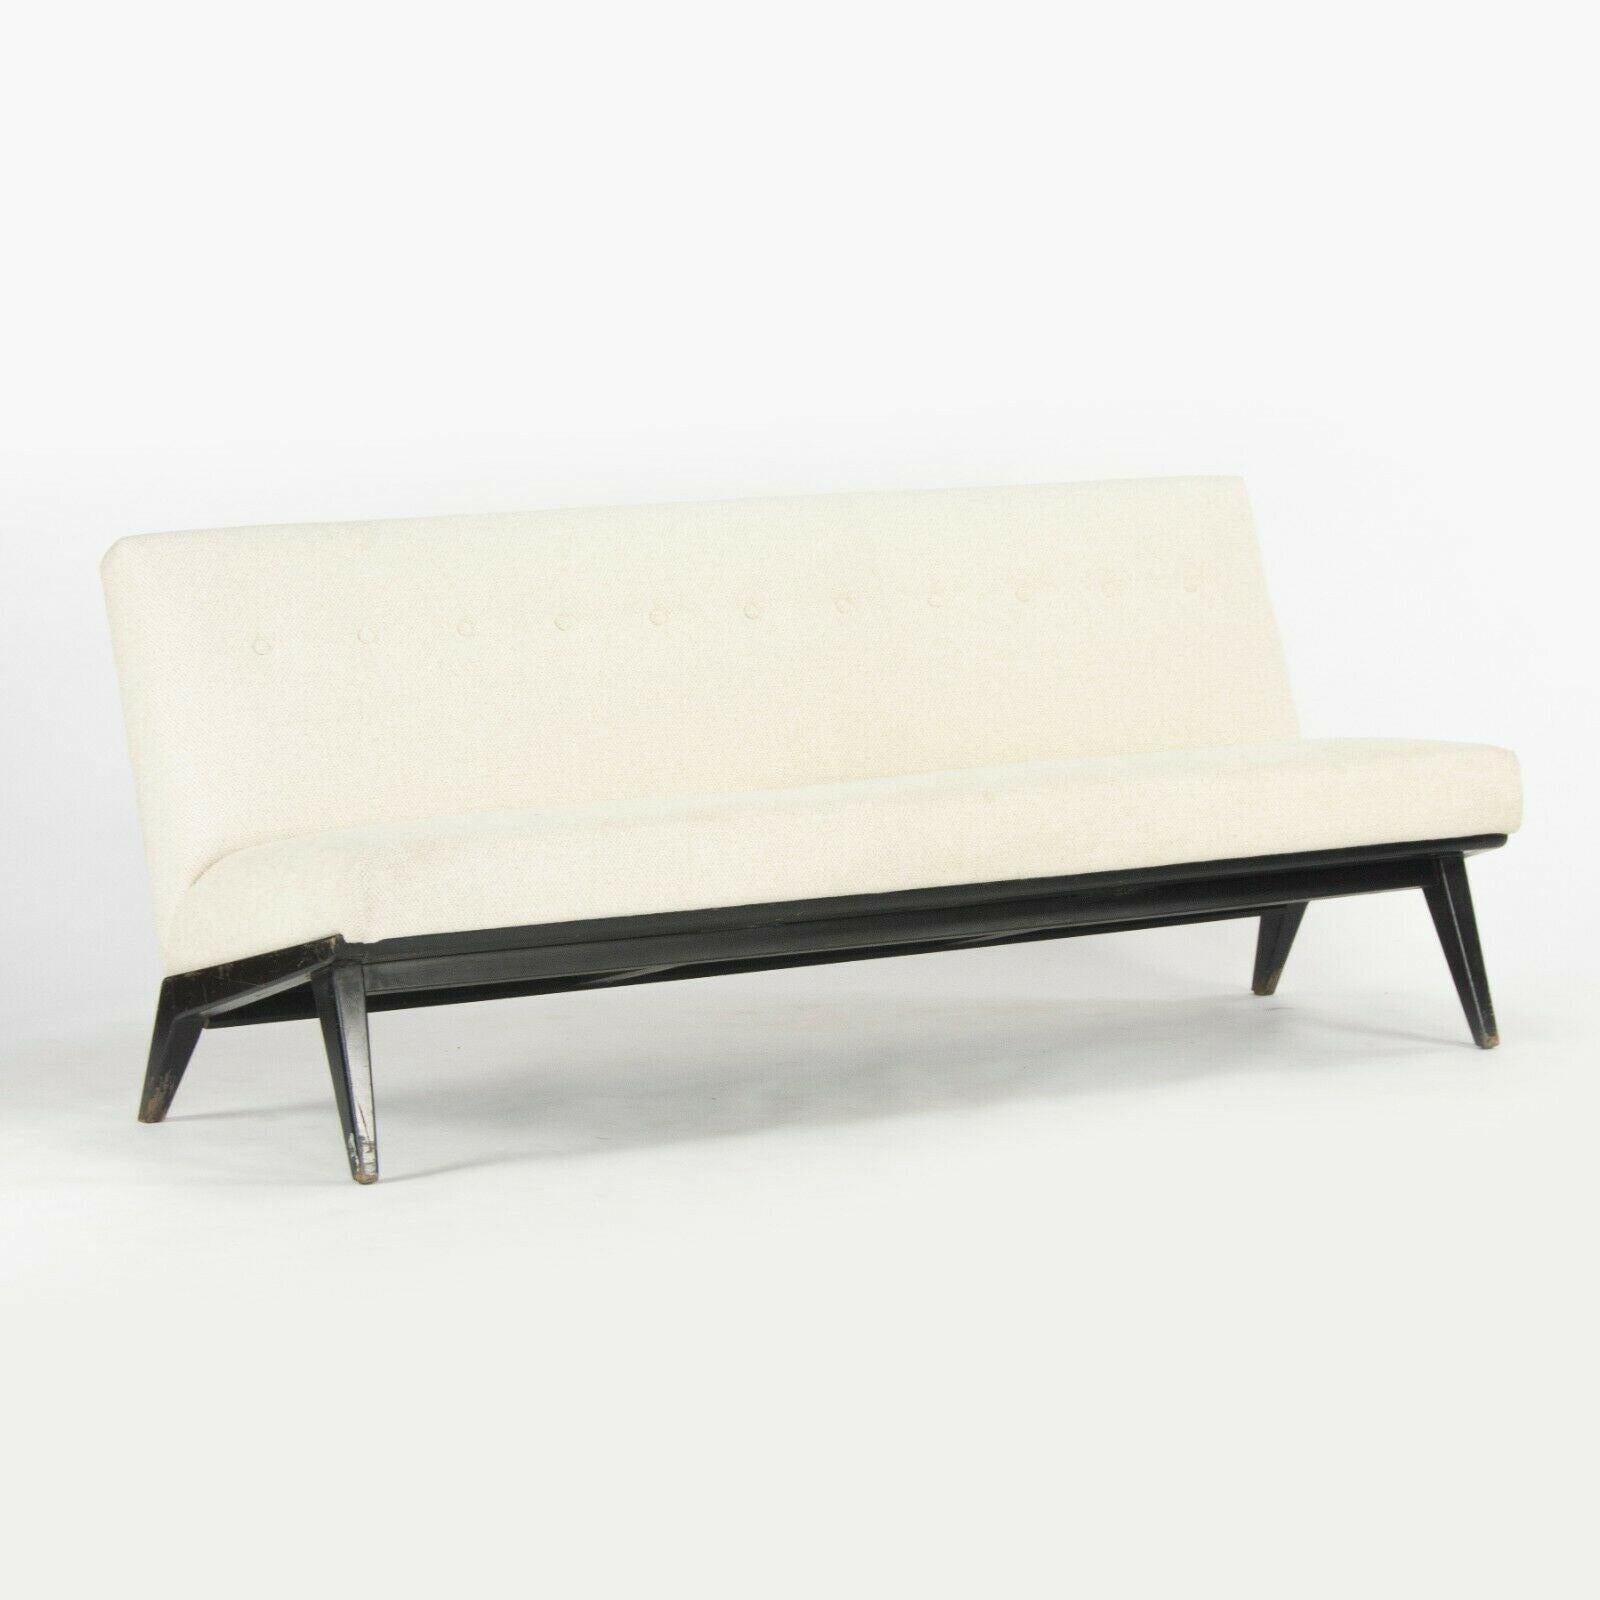 1949 Jens Risom No. 23 Sofa with New Upholstery Signed H.G. Knoll Products In Good Condition For Sale In Philadelphia, PA